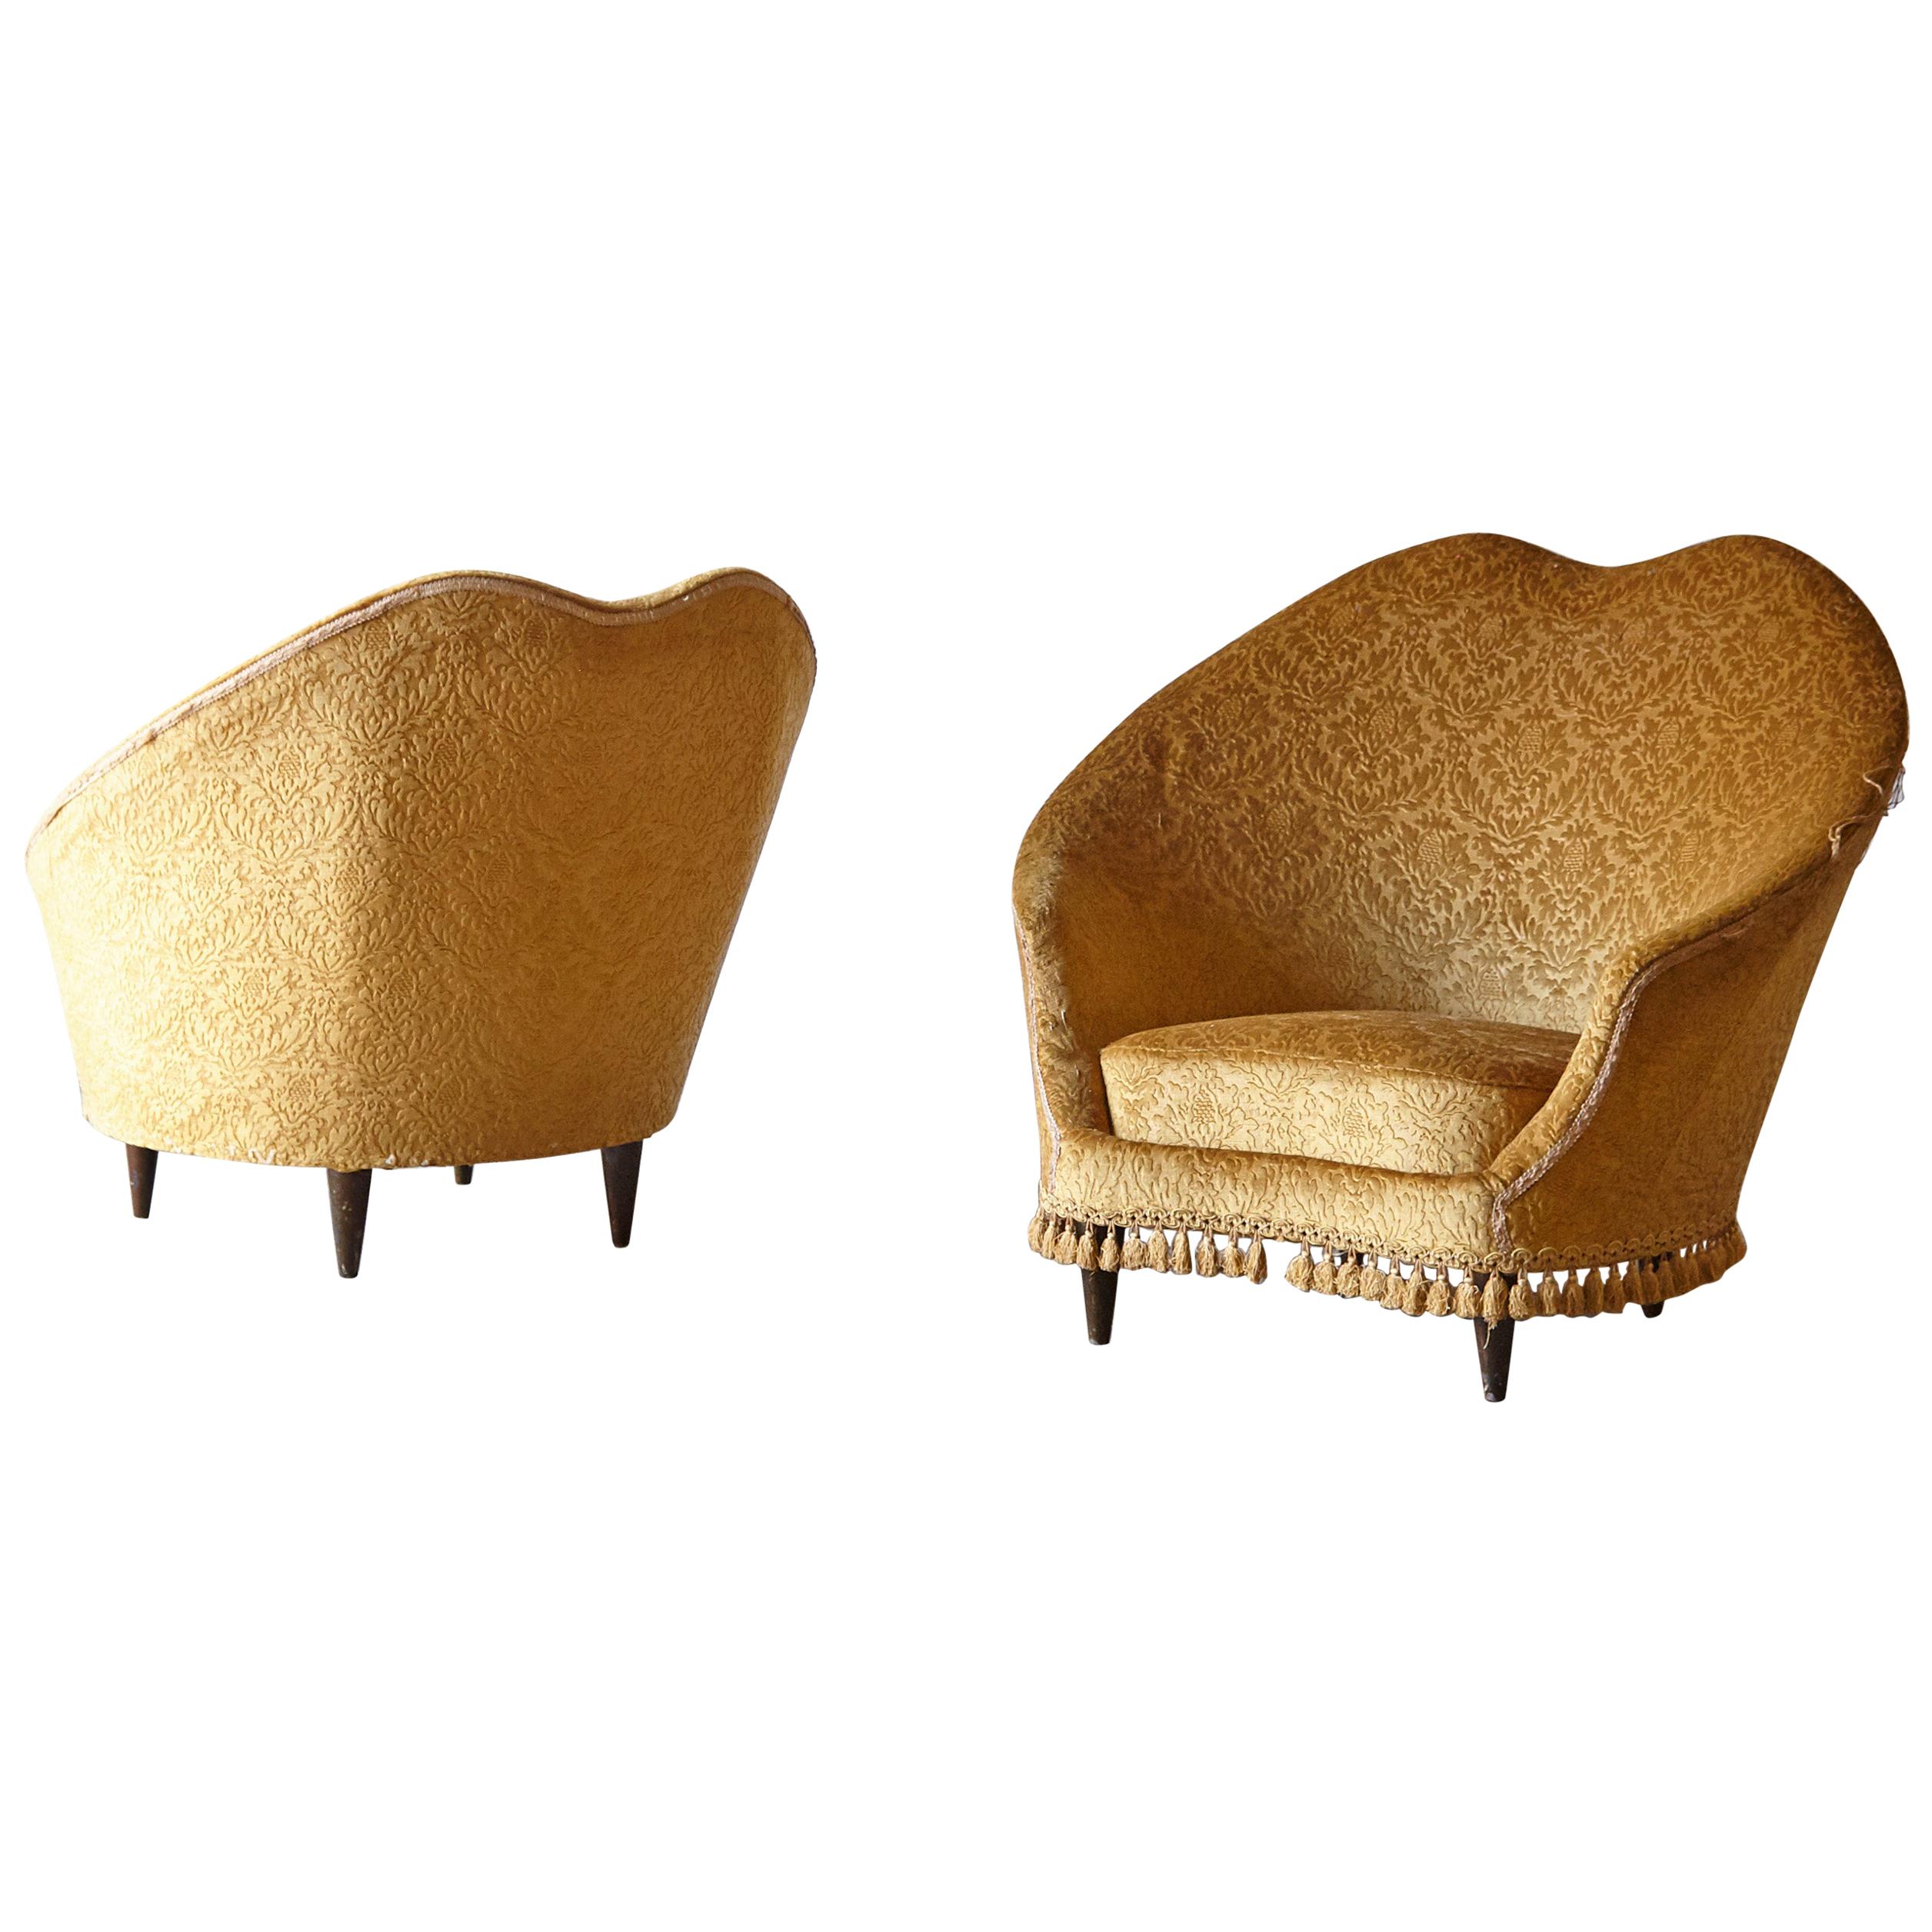 Pair of Federico Munari Lounge Chairs, for Reupholstery, Italy, 1950s